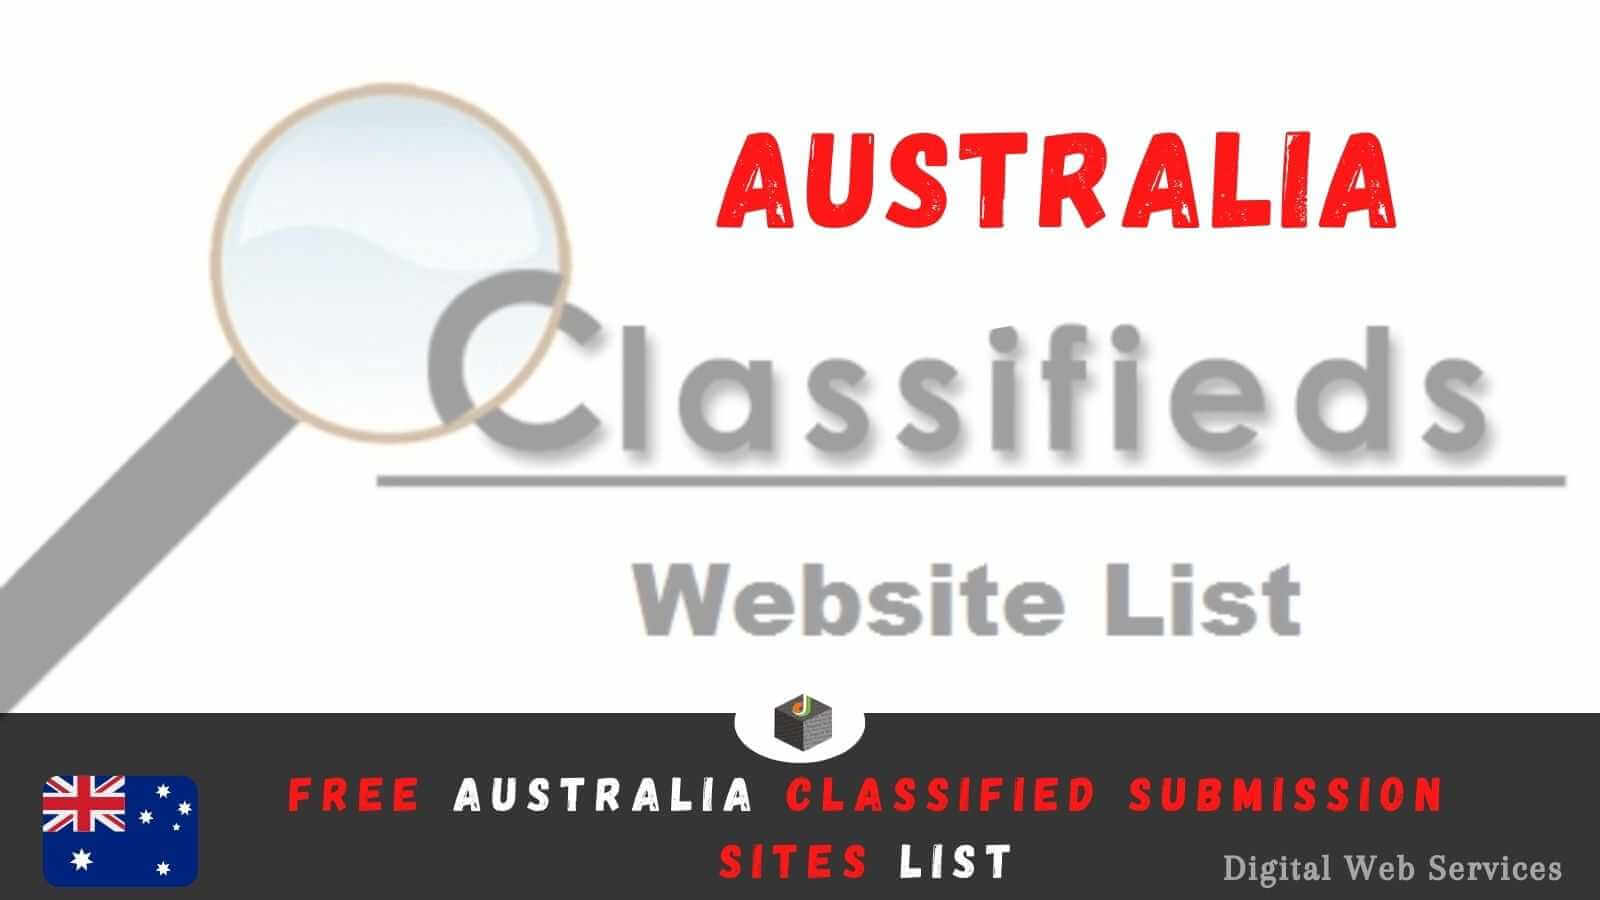 Free Australia Classified Submission Sites List